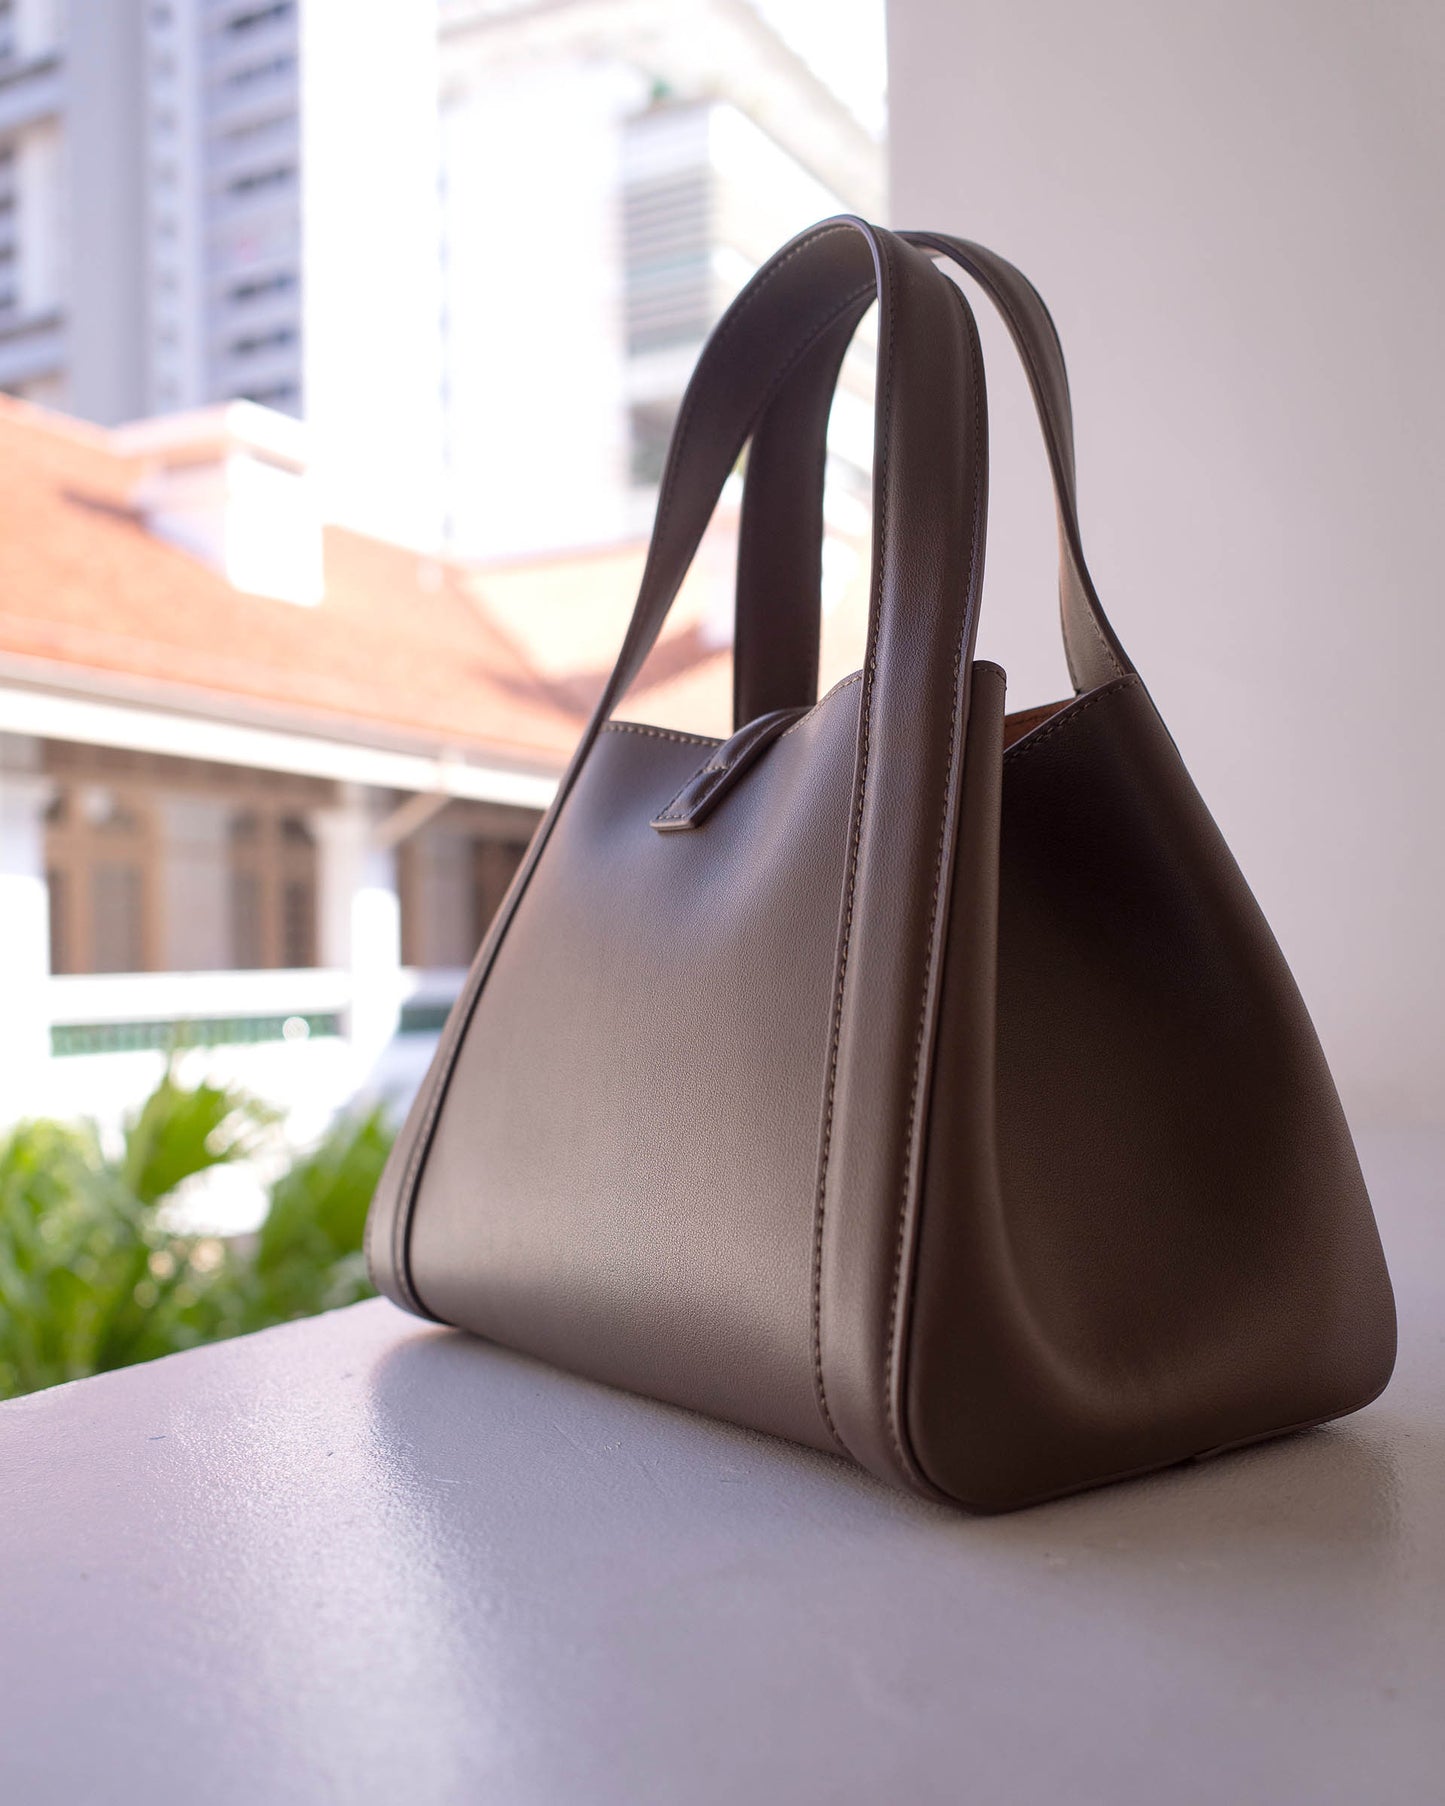 Top handle leather bag